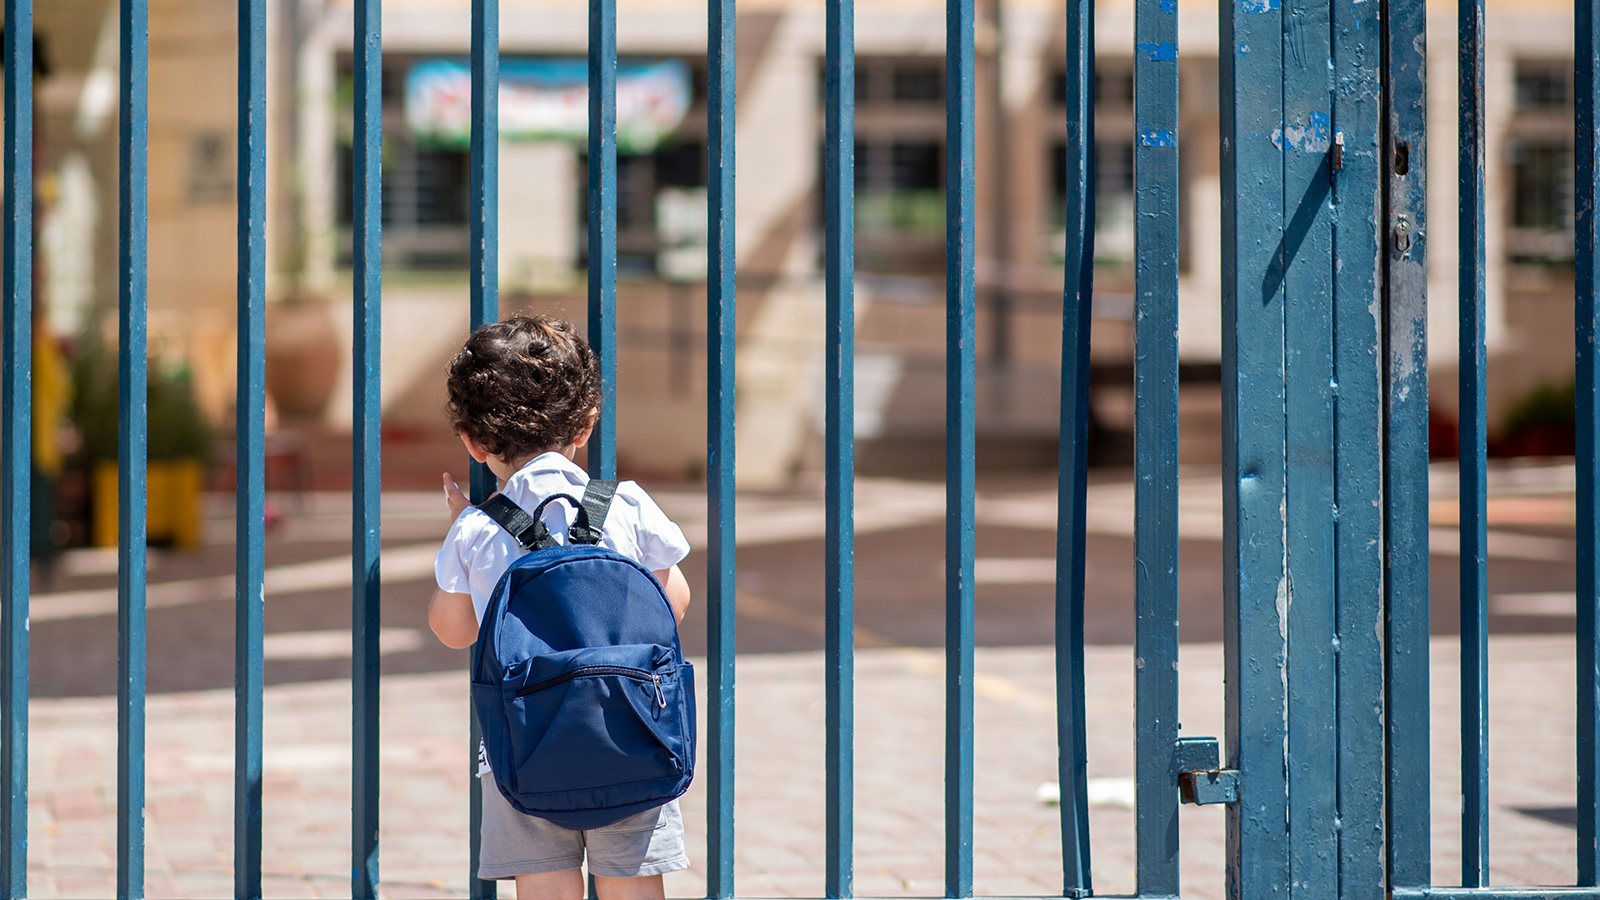 A little boy with a backpack outside some blue school gates peering inside